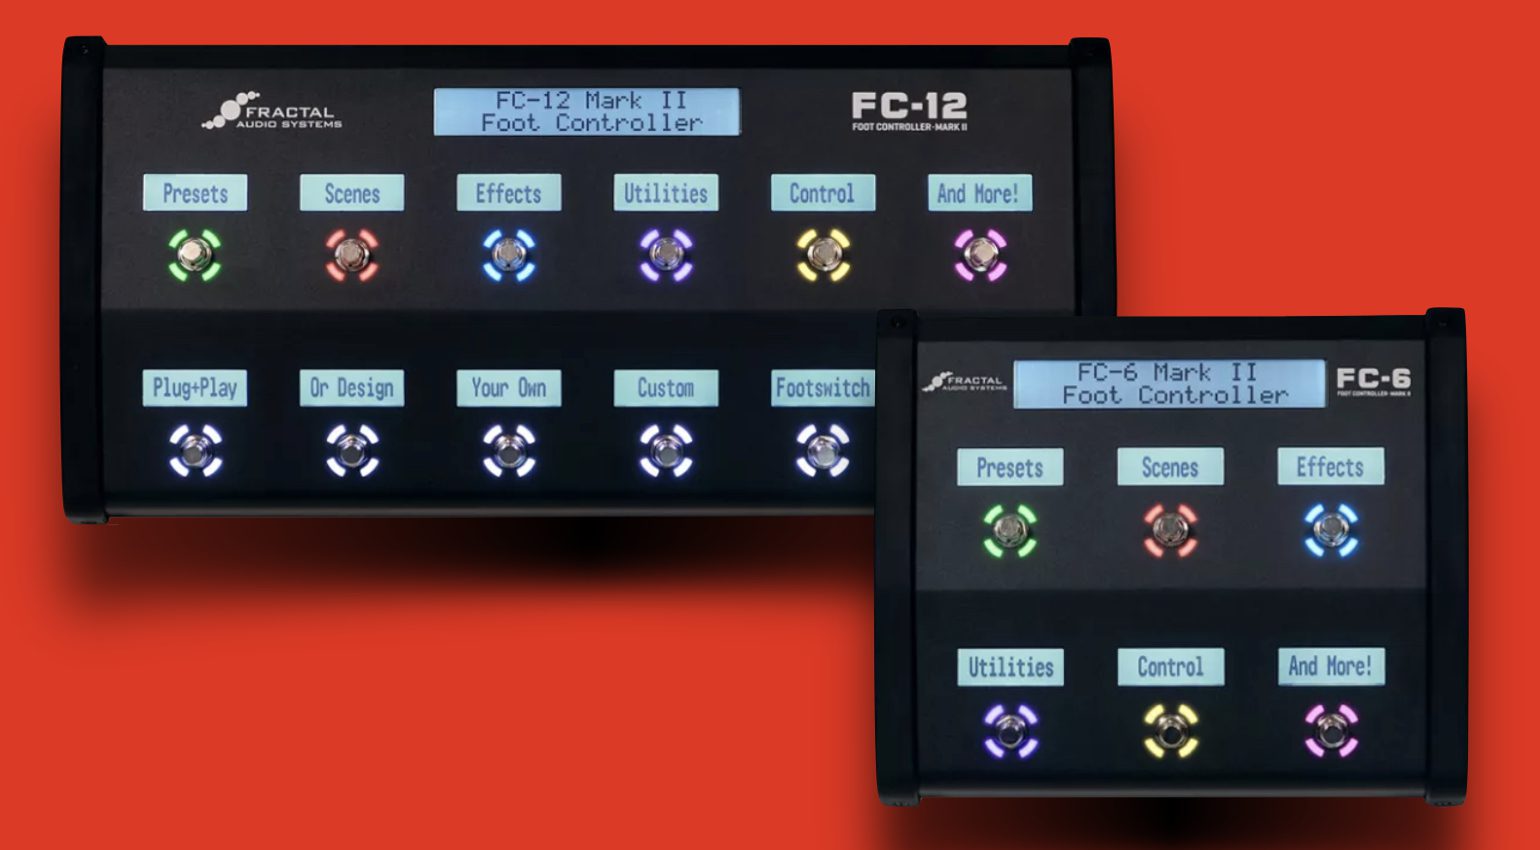 Fractal Audio FC-6 and FC-12 Mark II foot controllers